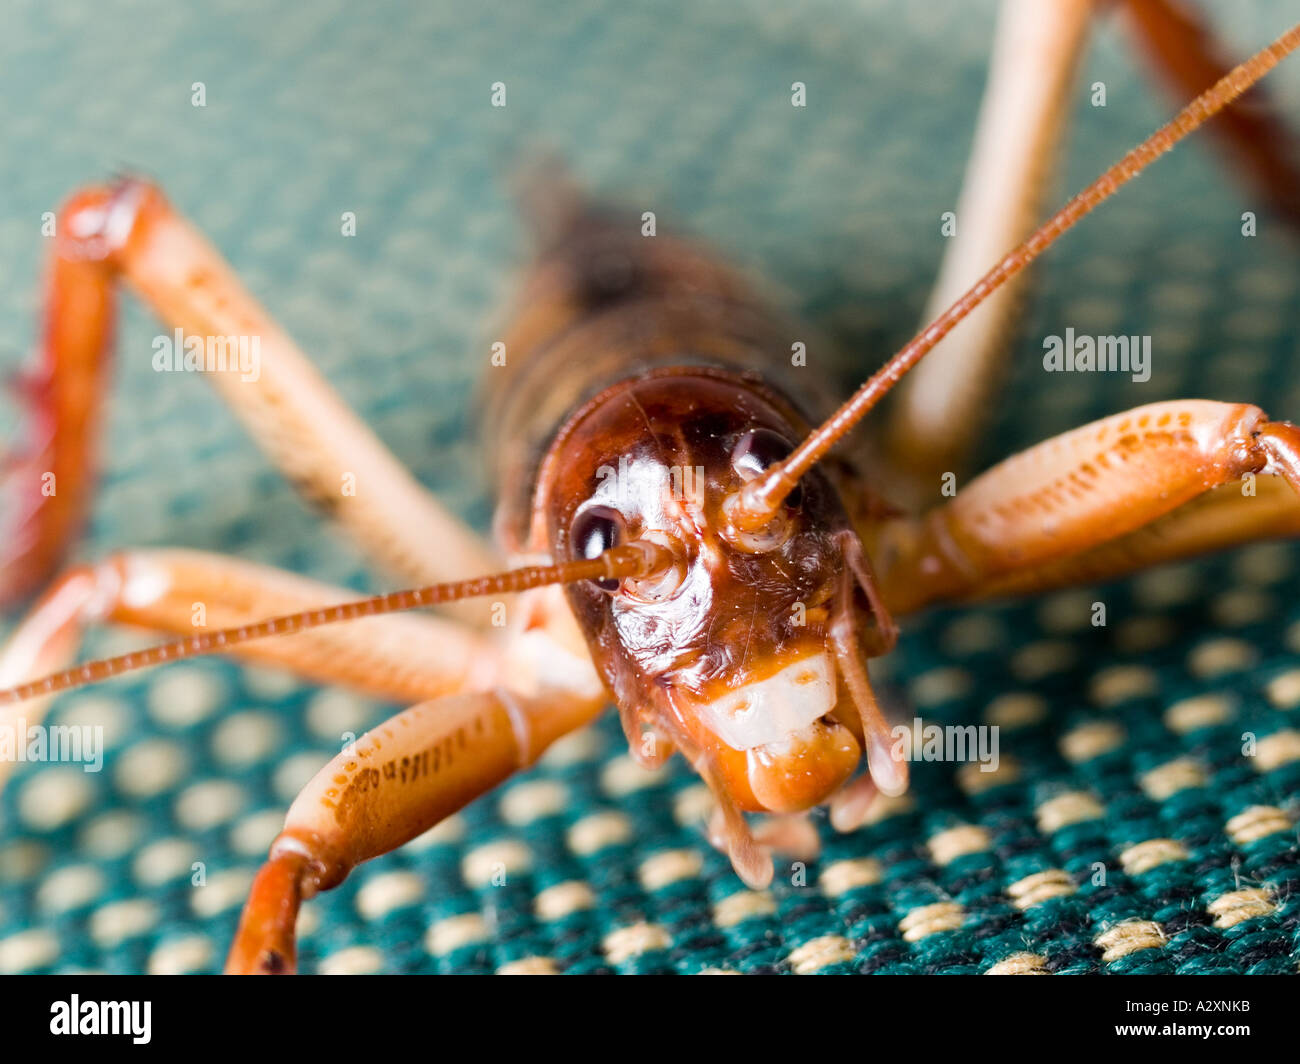 Close up of a weta an exotic insect related to grasshoppers crickets and locusts Stock Photo